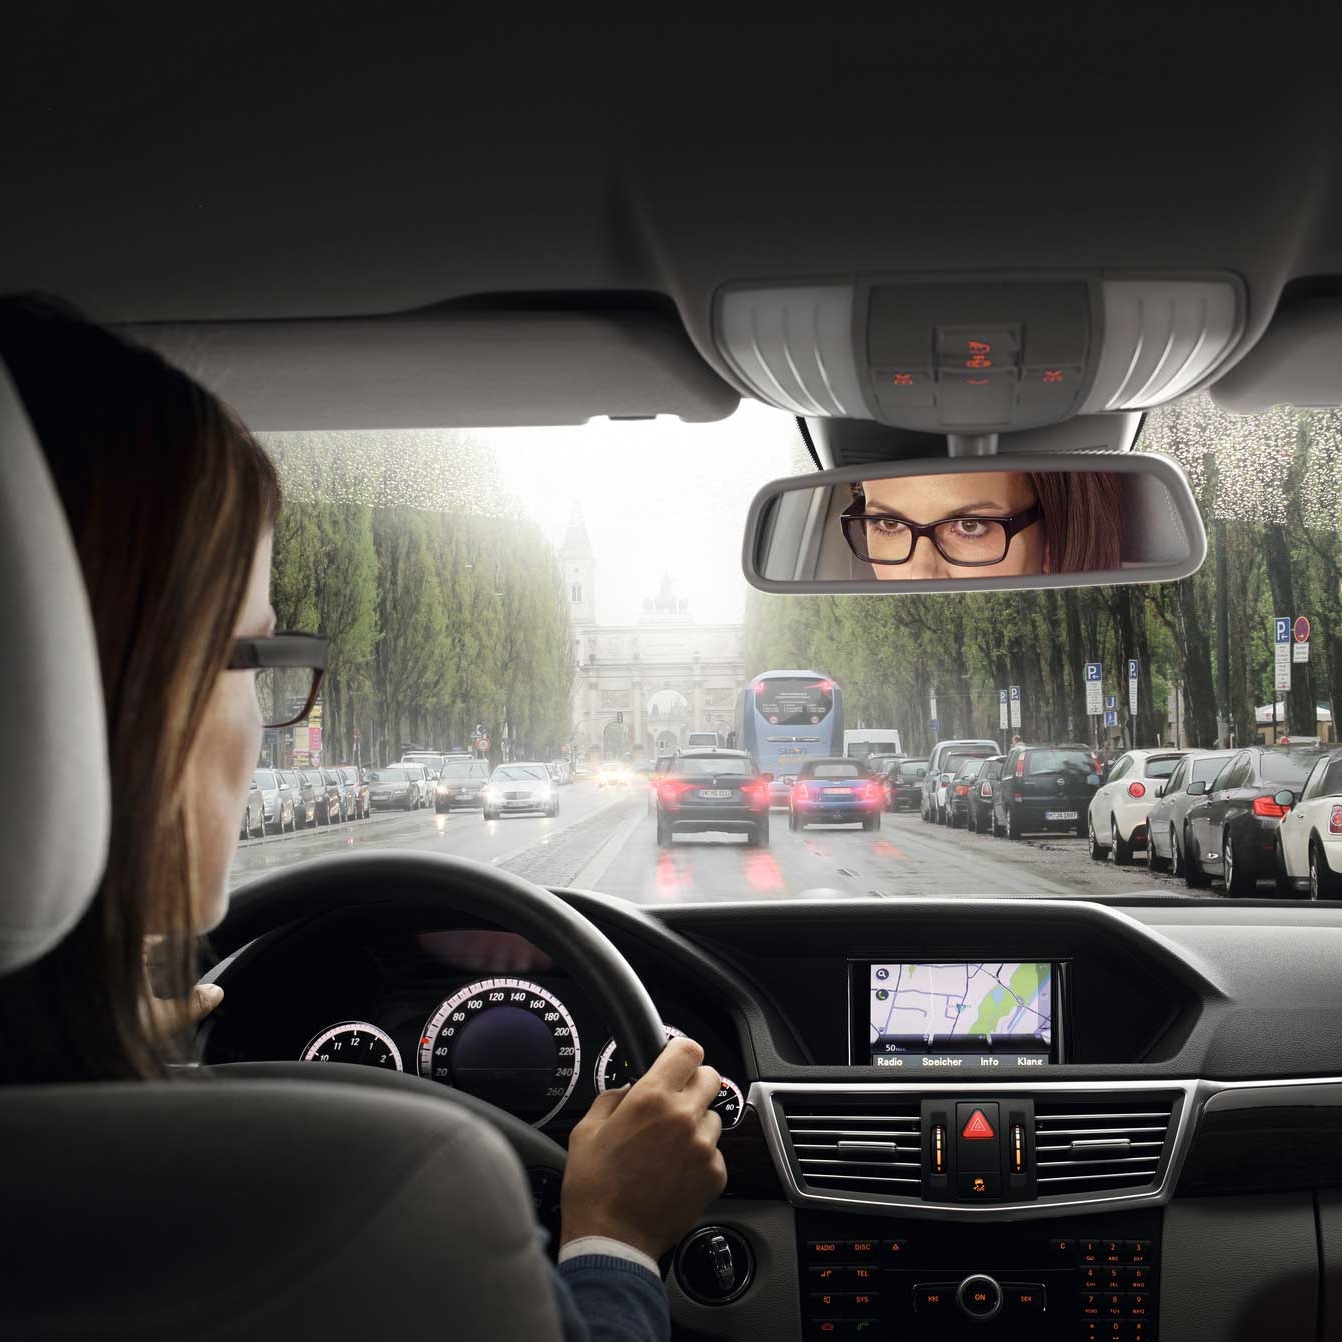 Difficulty in refocusing when the eyes alternate between the dashboard and the road ahead